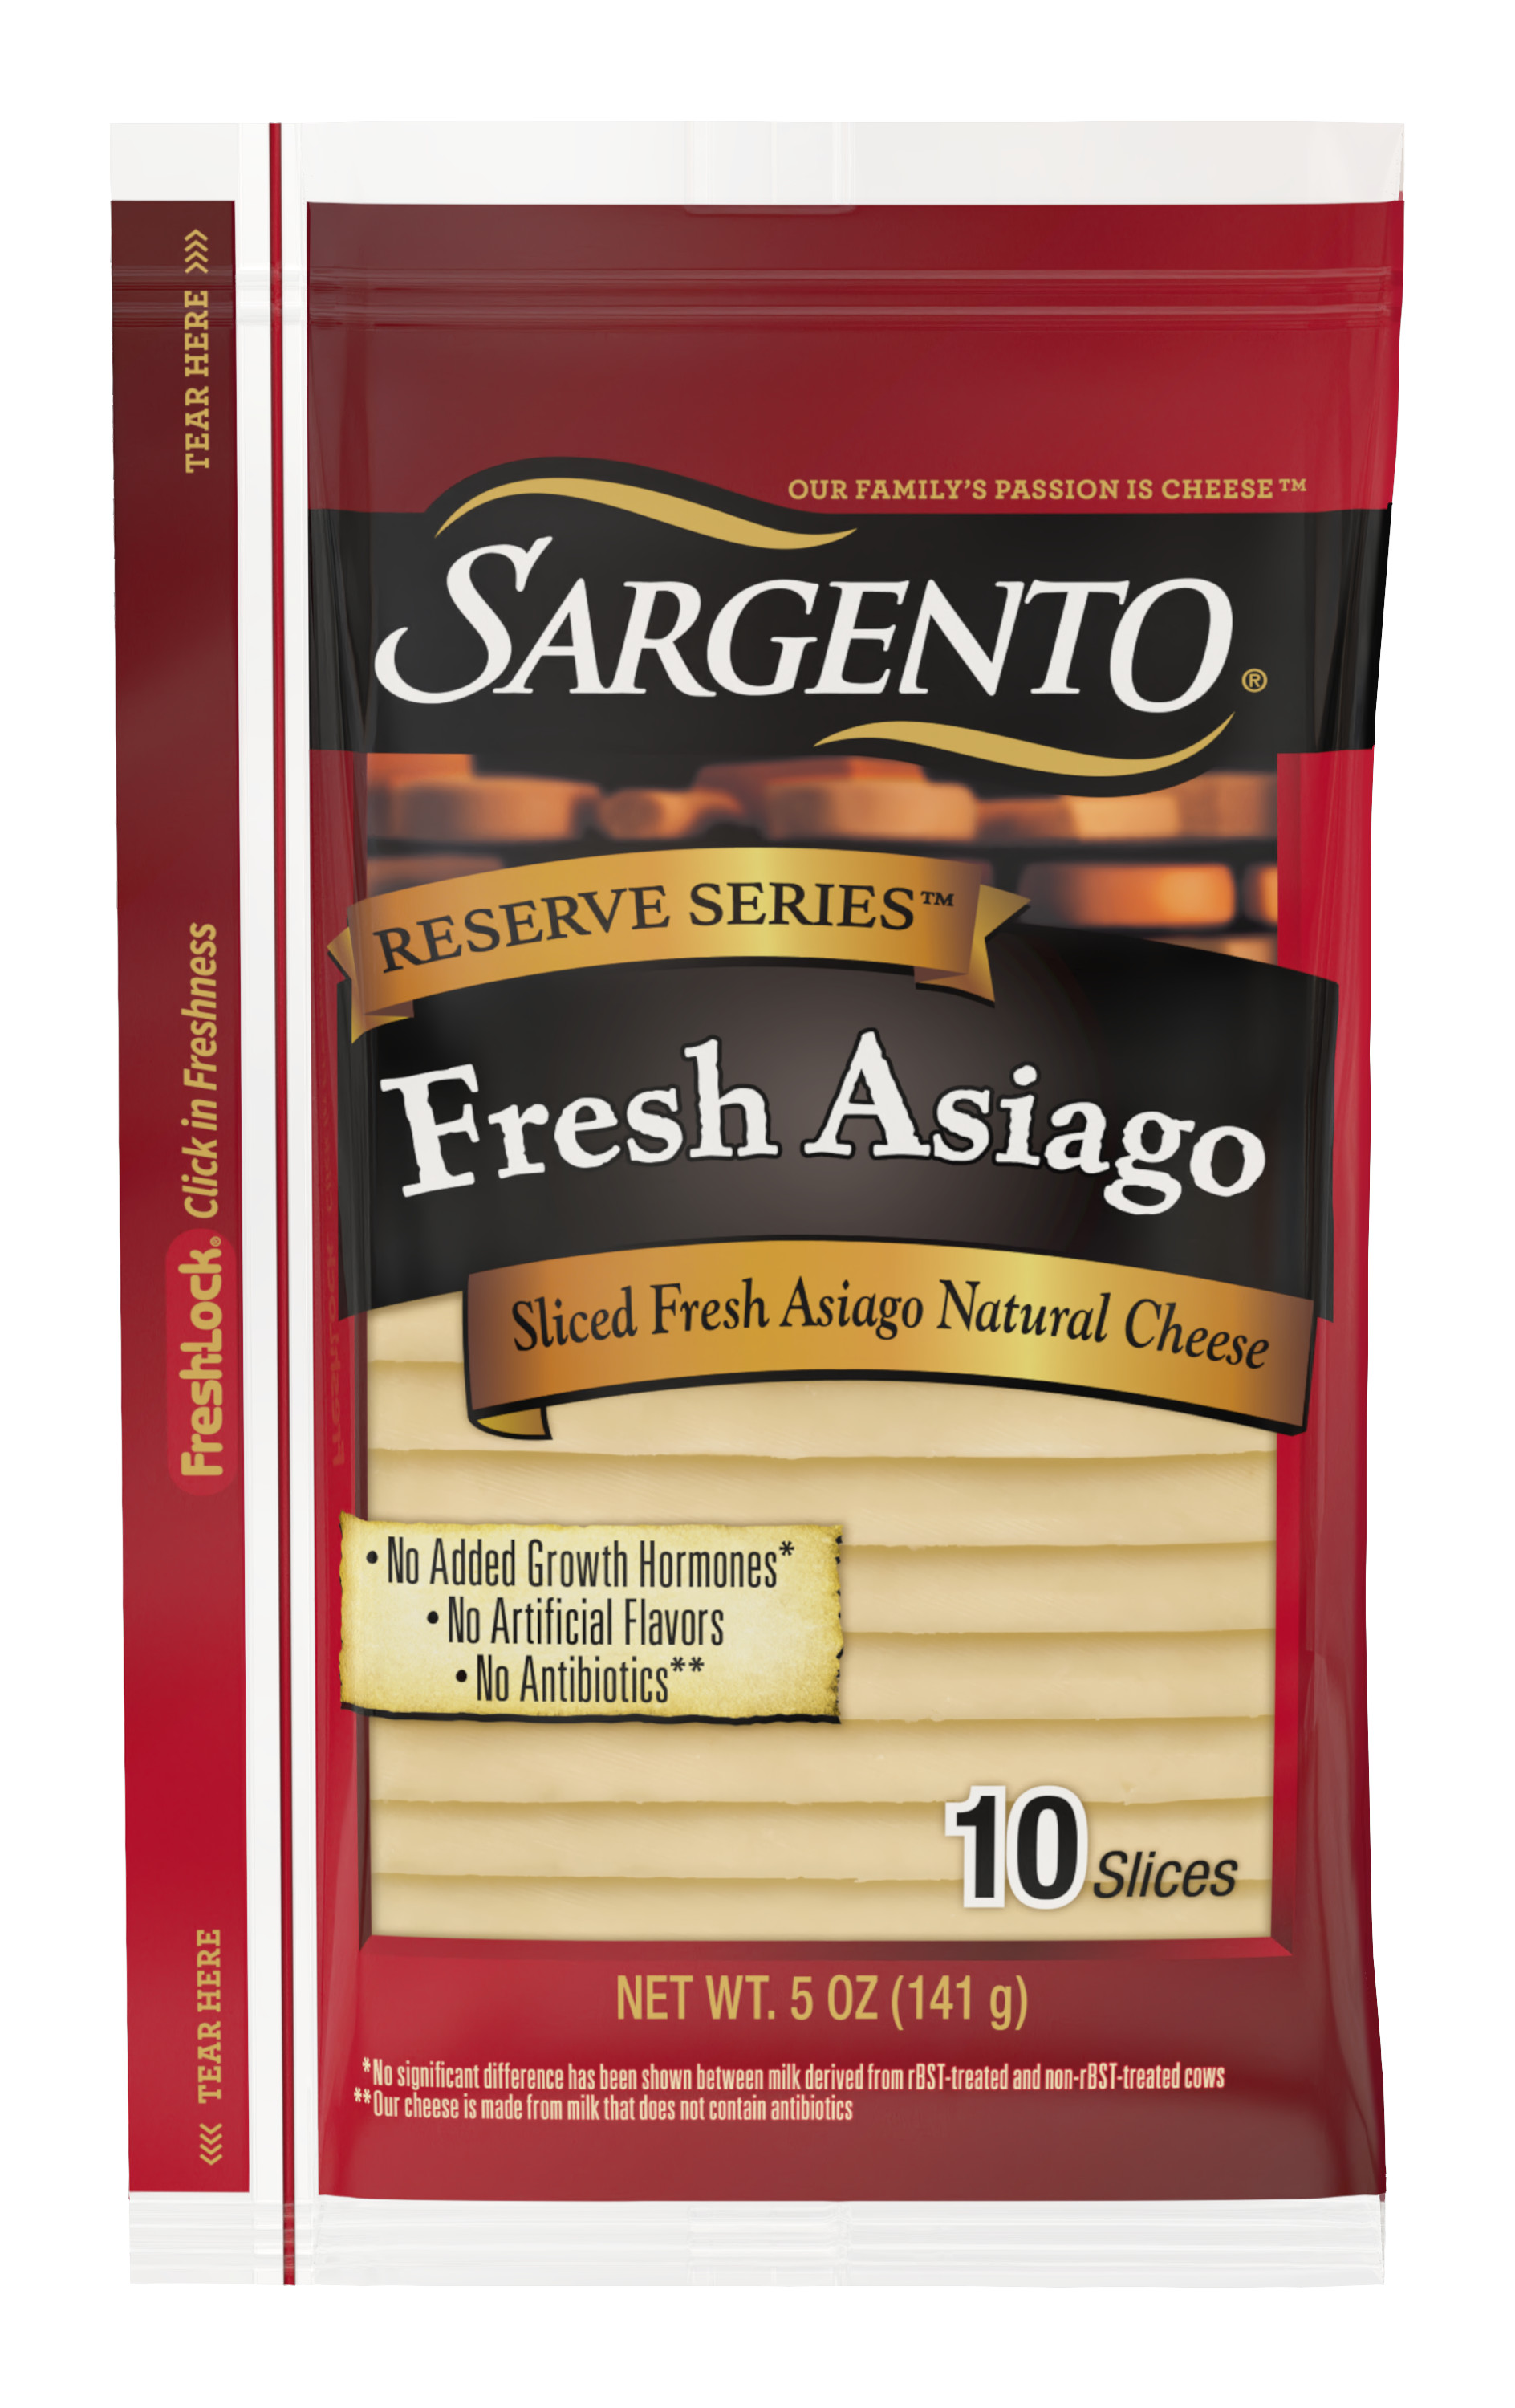 Sargento® Reserve Series™ Sliced Fresh Asiago Natural Cheese